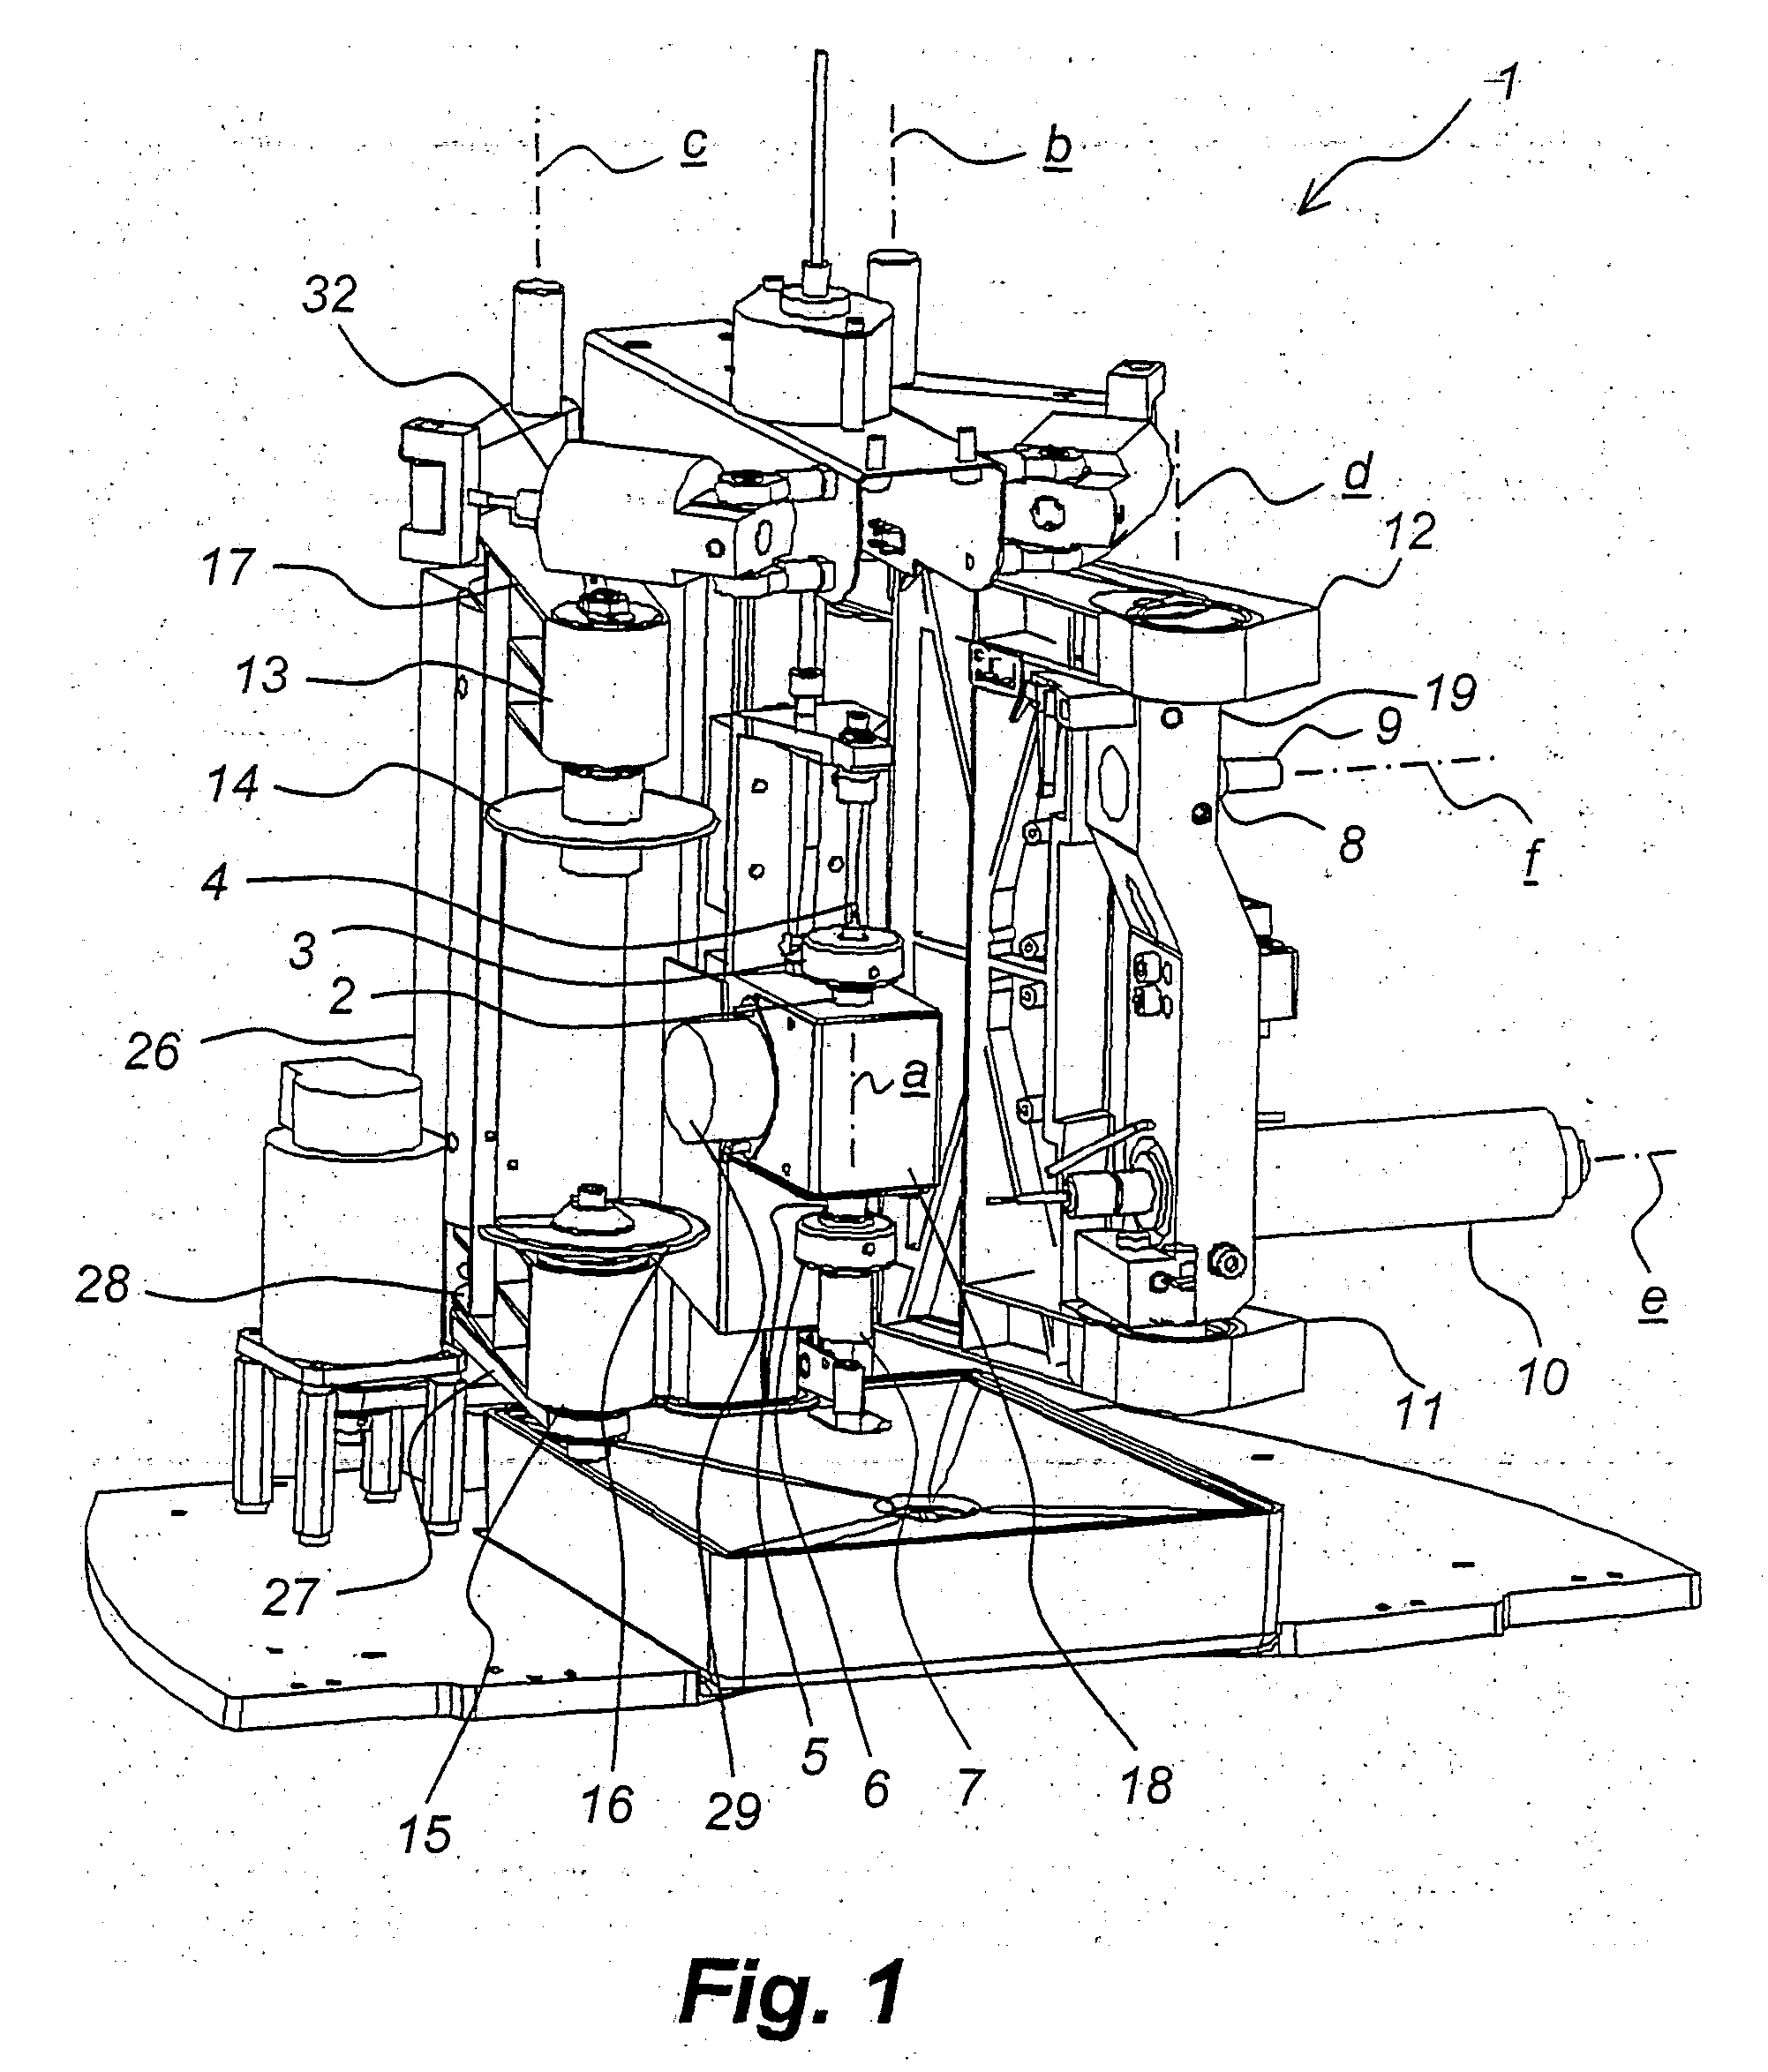 Apparatus for making dental inlays and the like